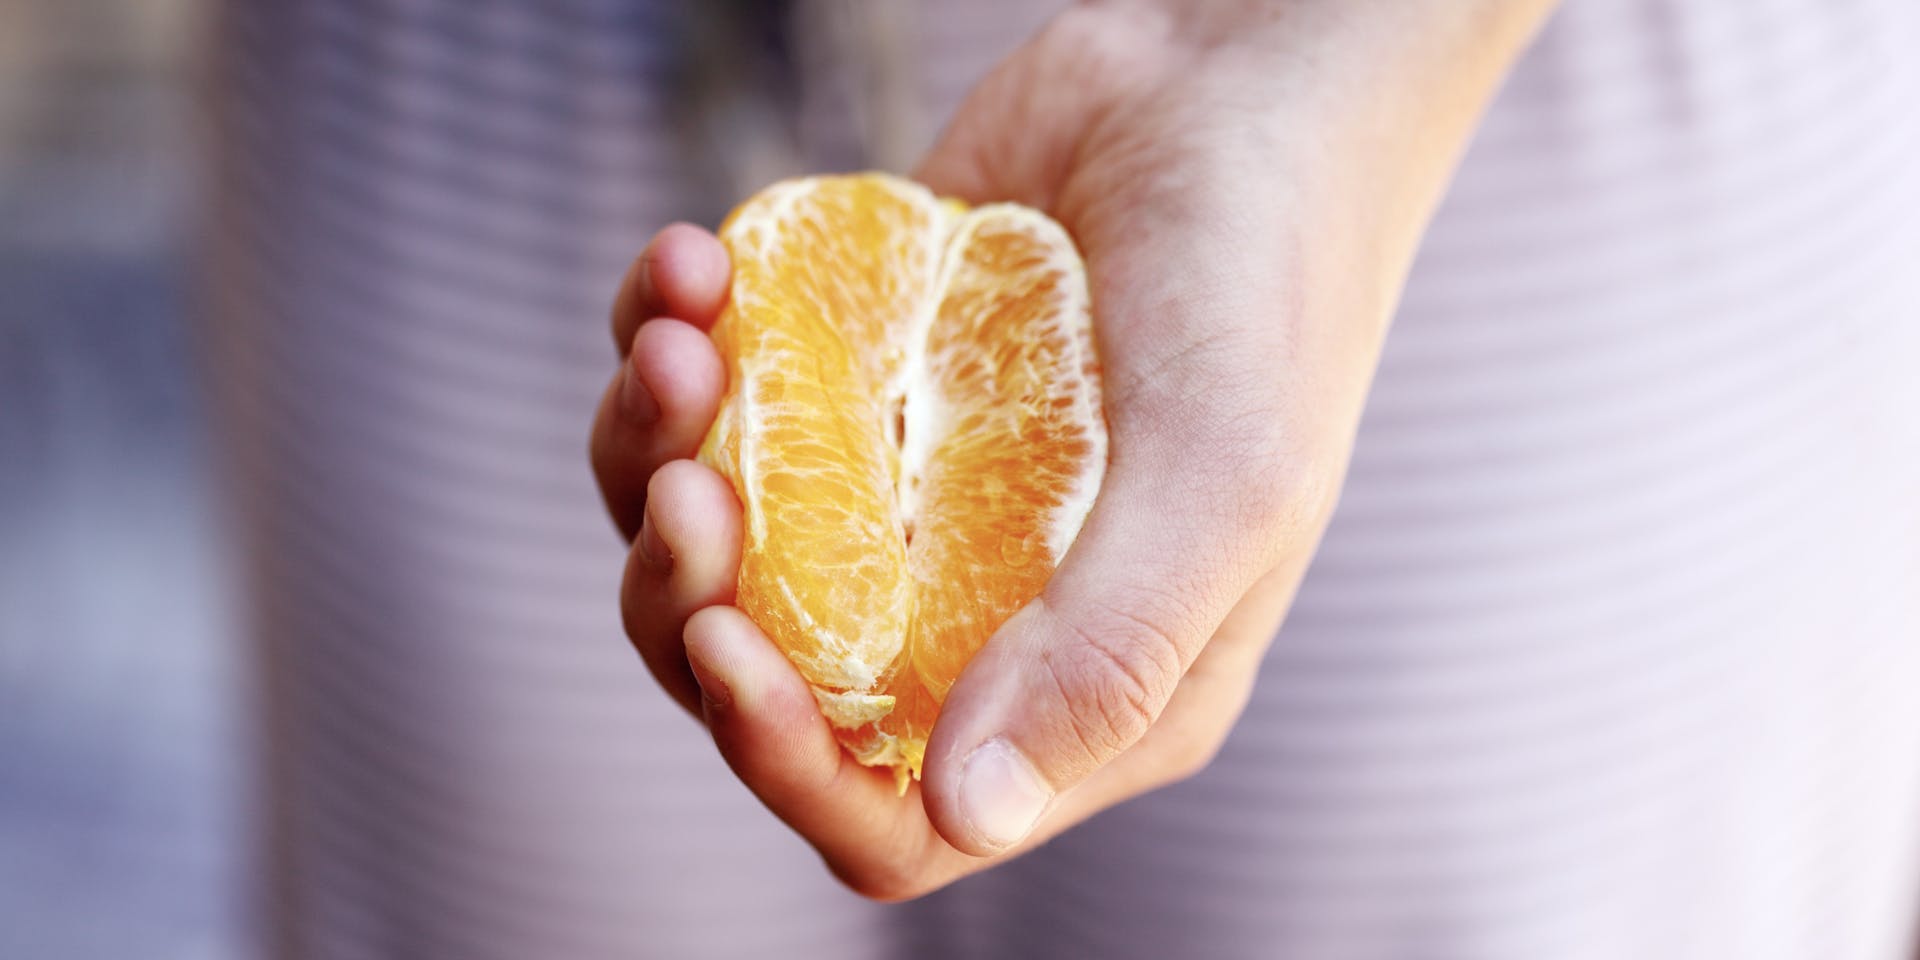 The hand of a white woman, holding half an orange